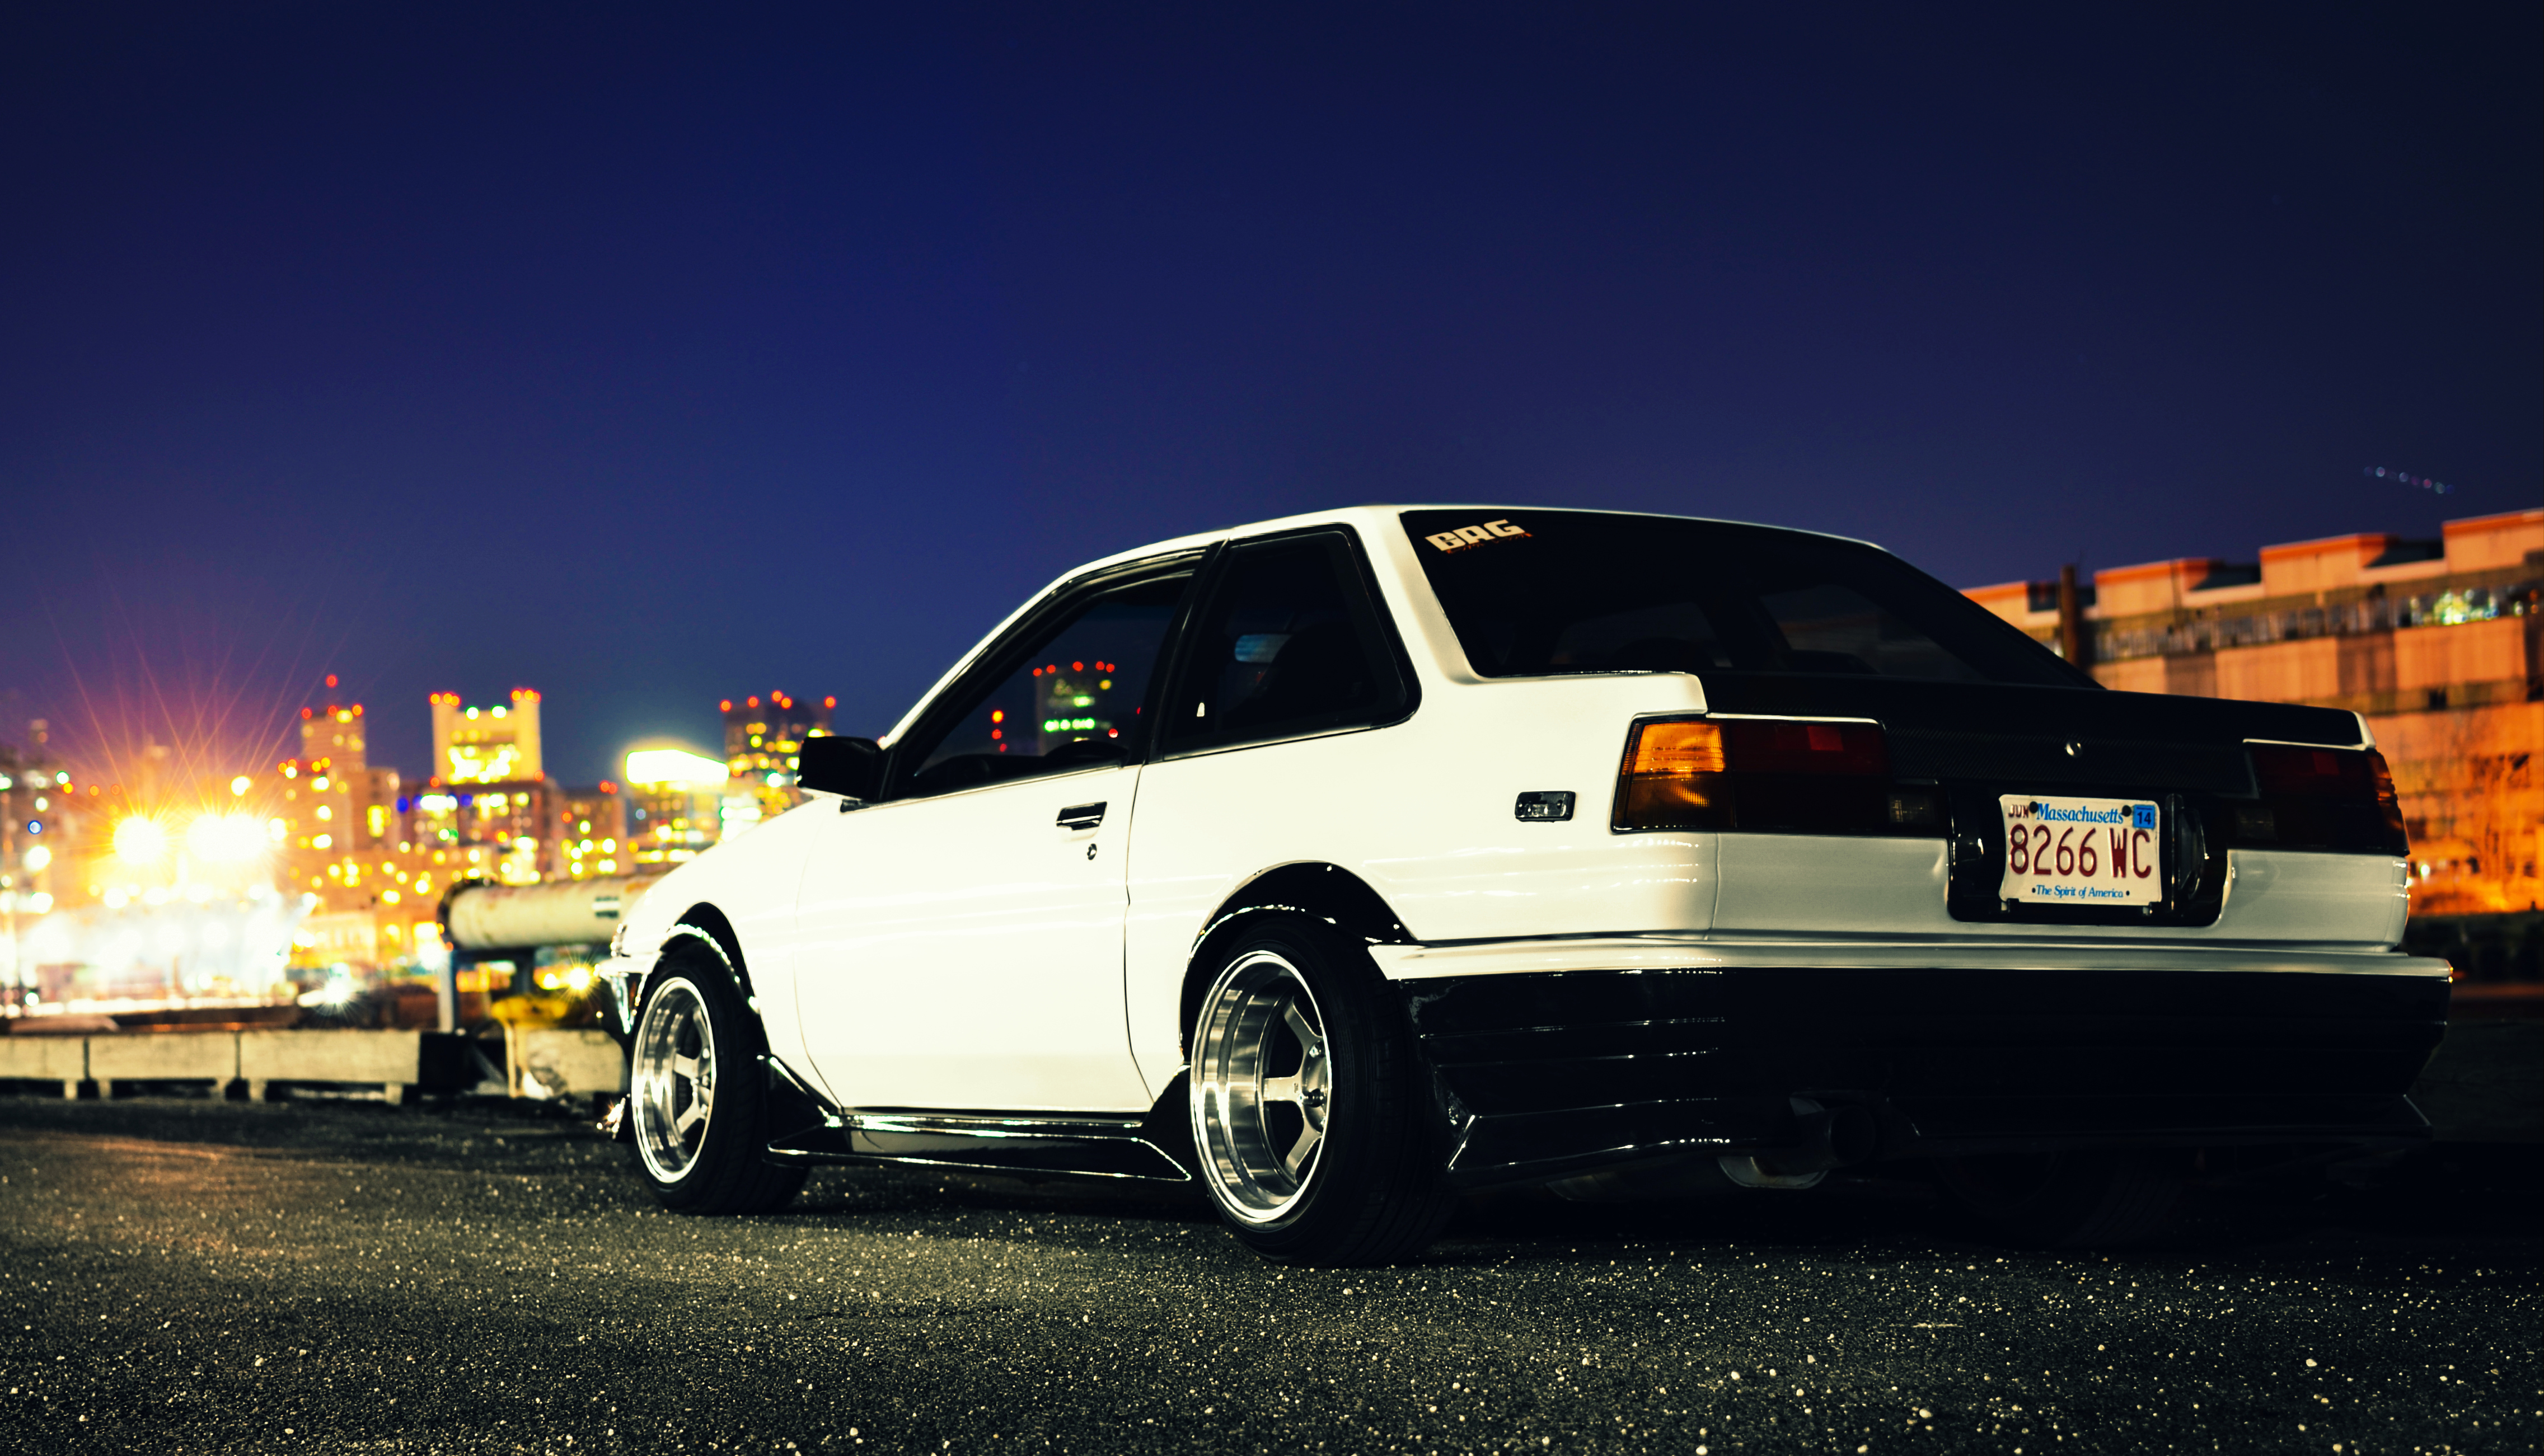 Toyota AE86 Computer Wallpapers, Desktop Backgrounds  4545x2602  ID 